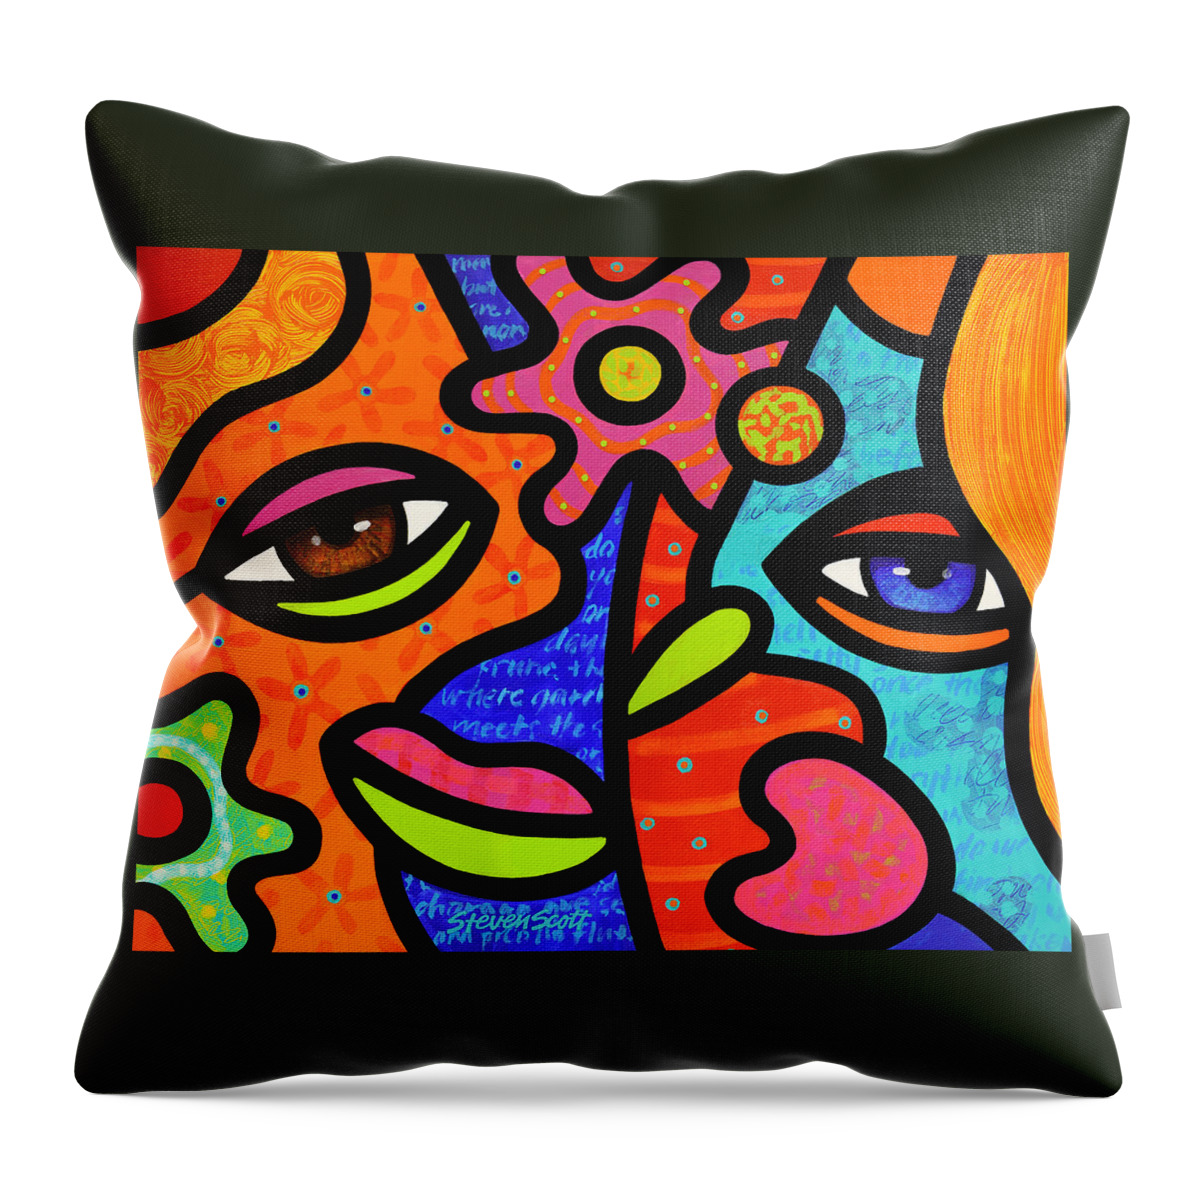 Shopping Throw Pillow featuring the painting Flower Market by Steven Scott